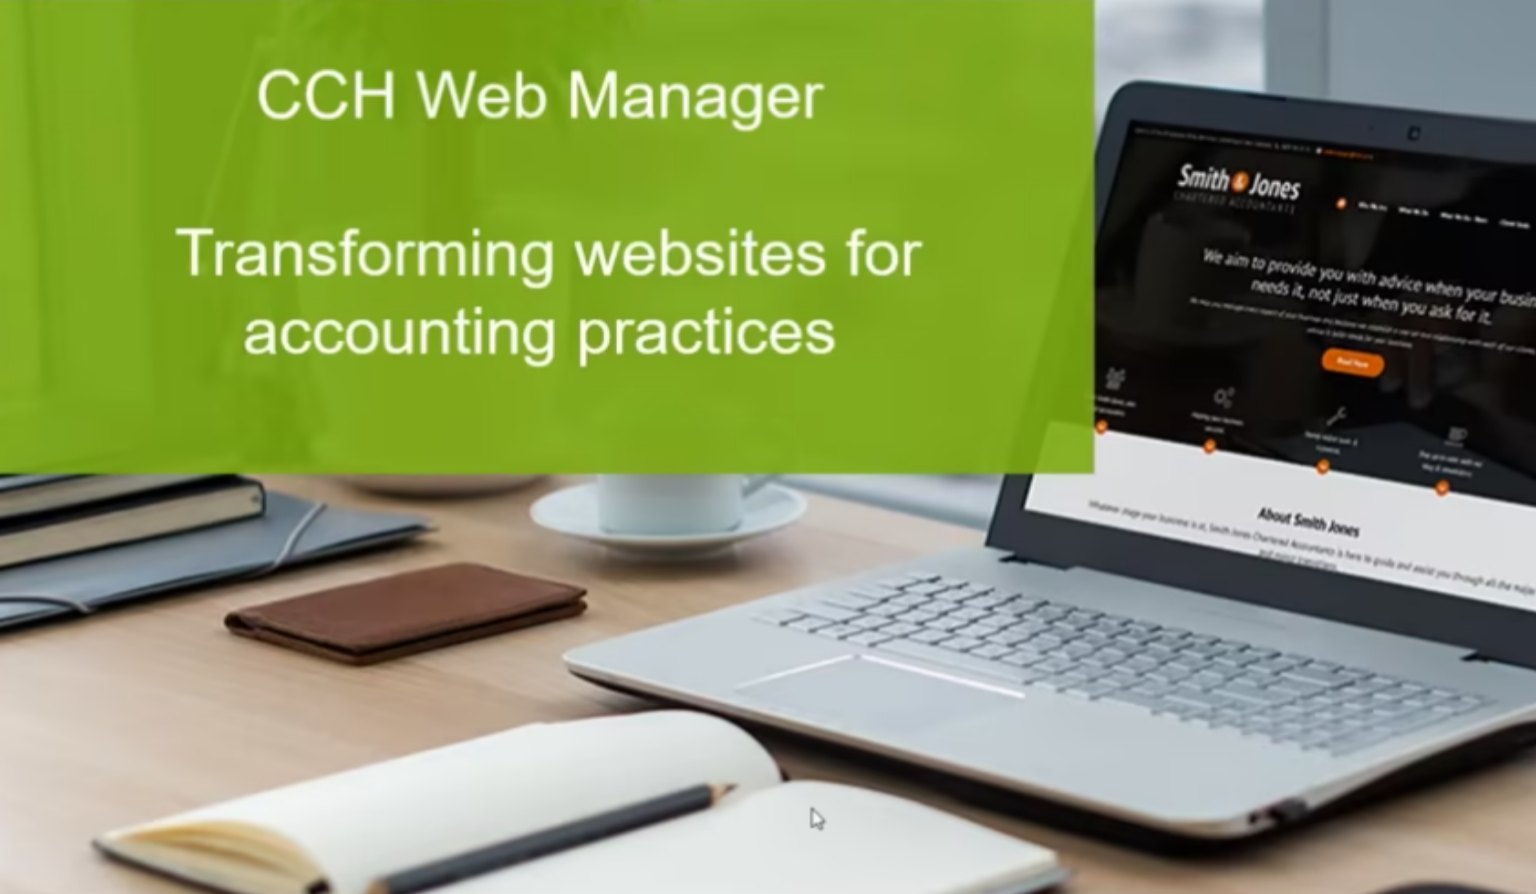 CCH Web Manager Video Oct 2021